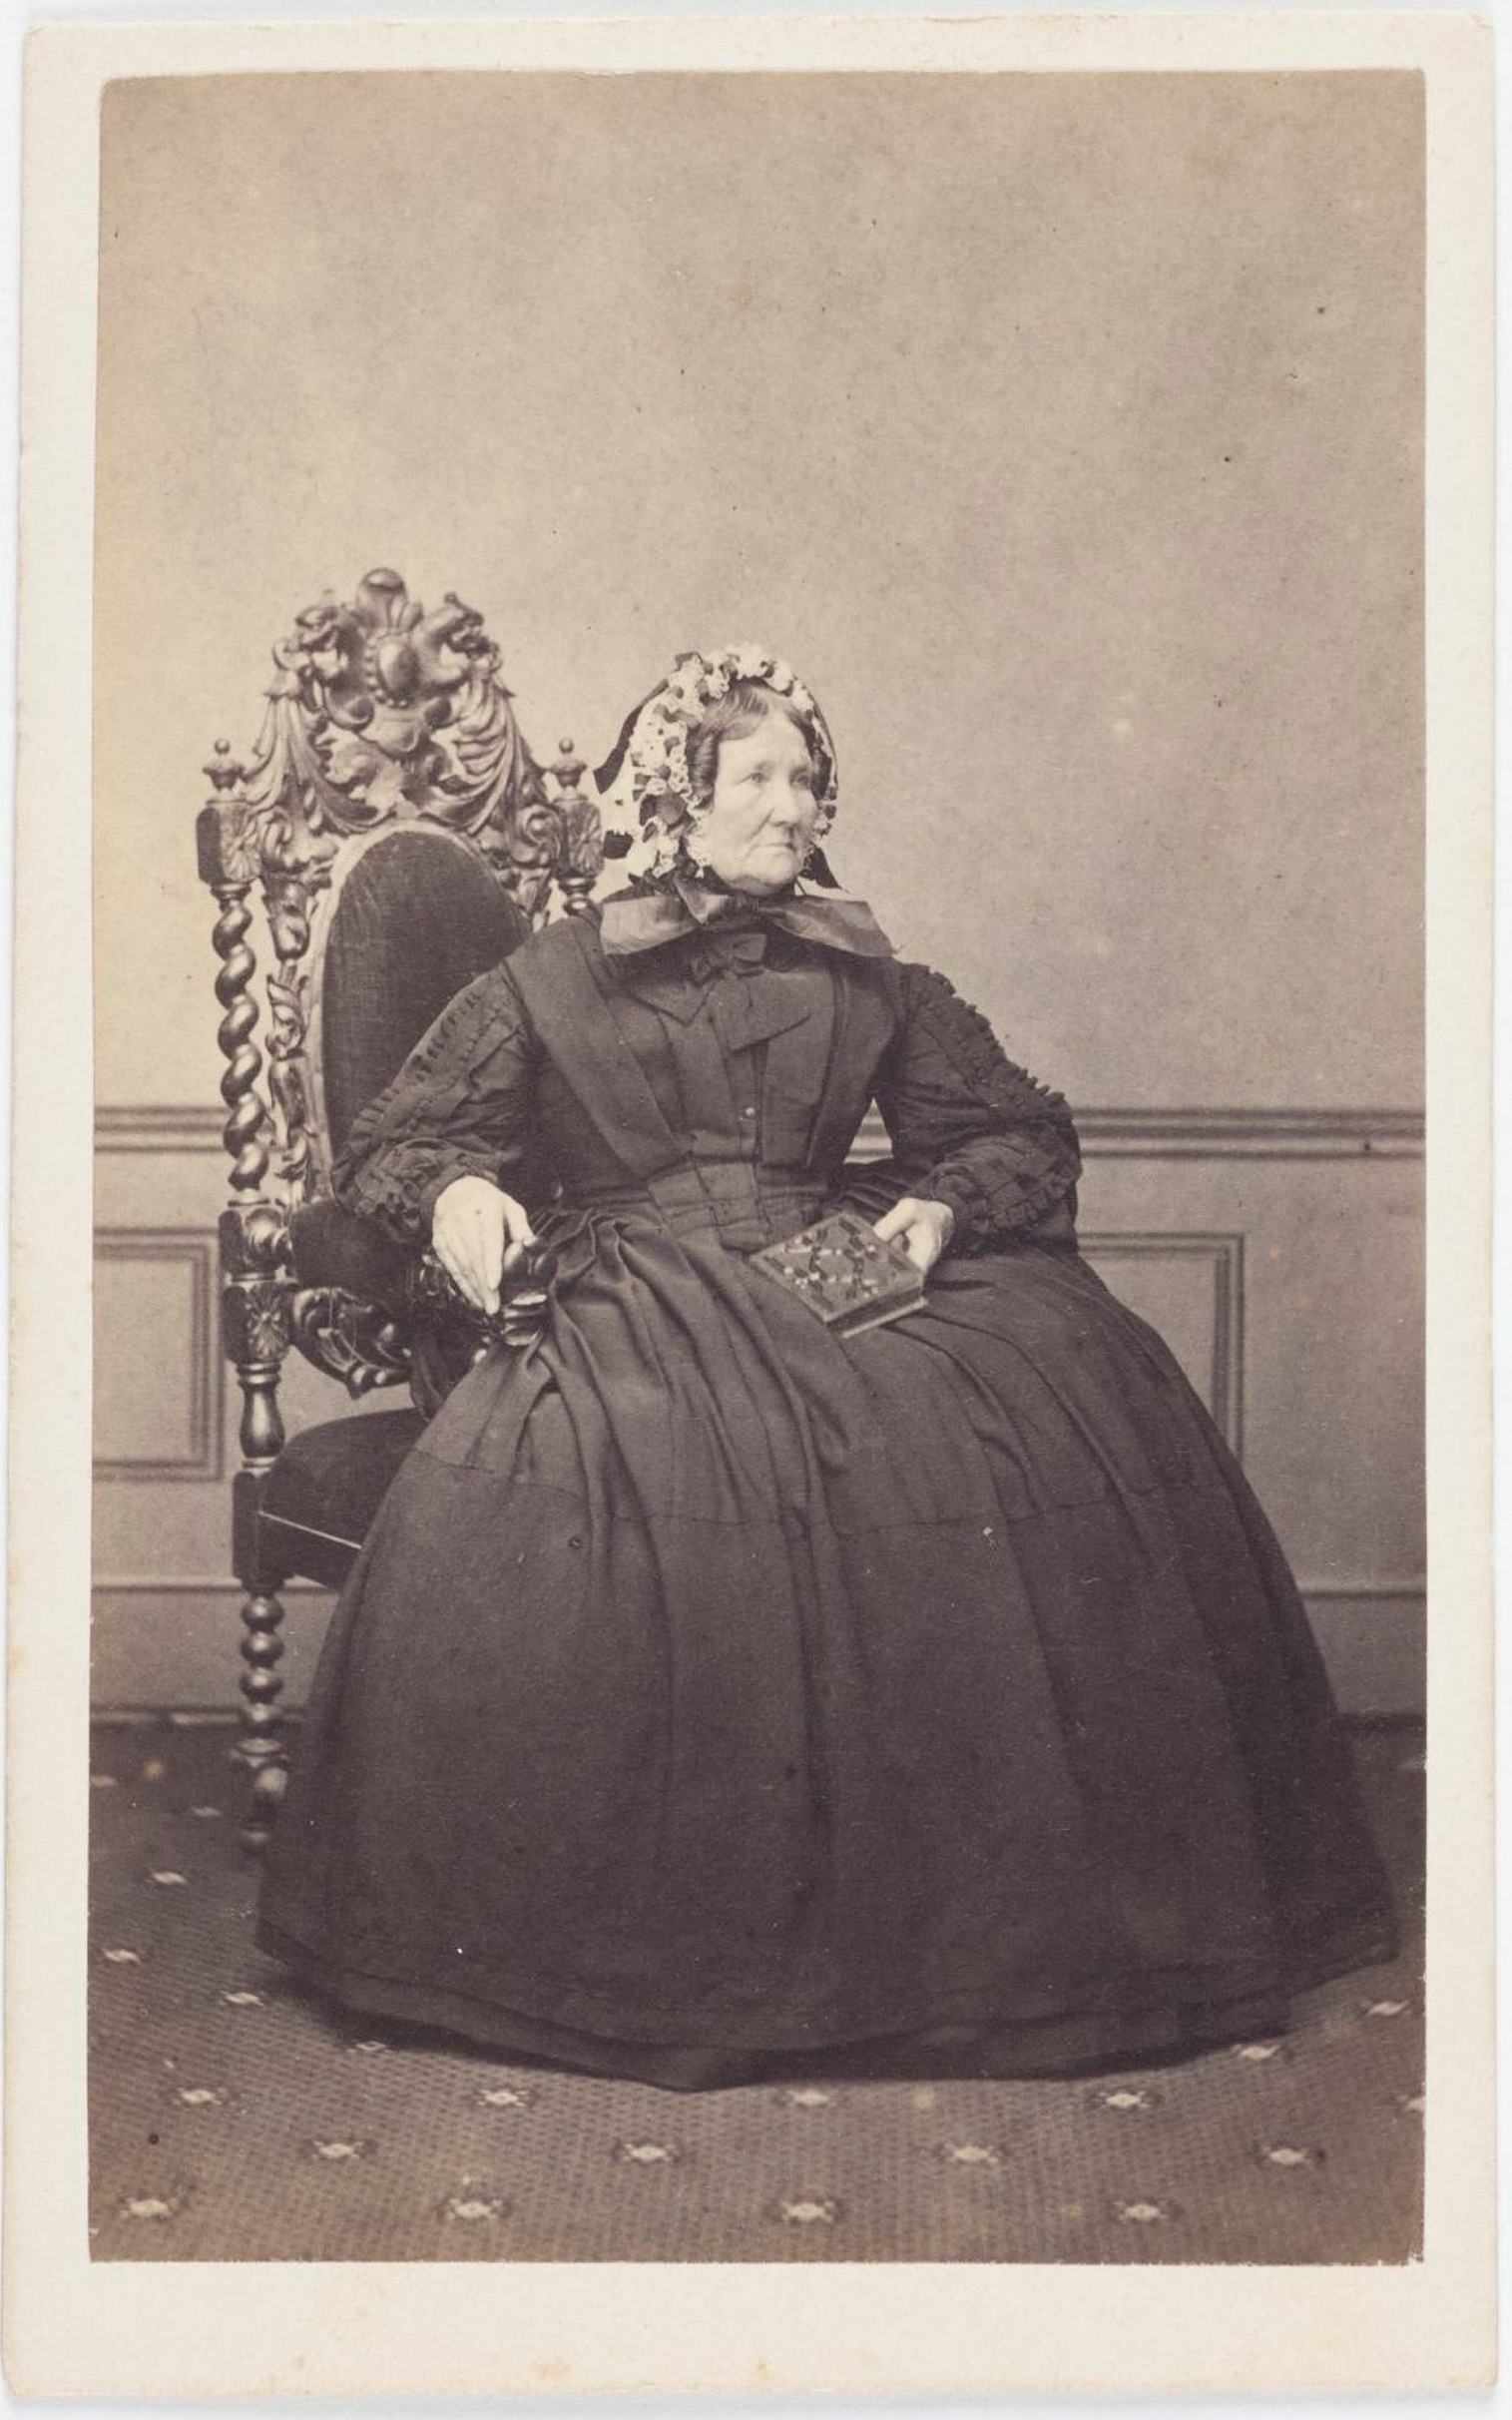 Mary Hassall, nee Rouse (1799-1883) / Freeman Brothers